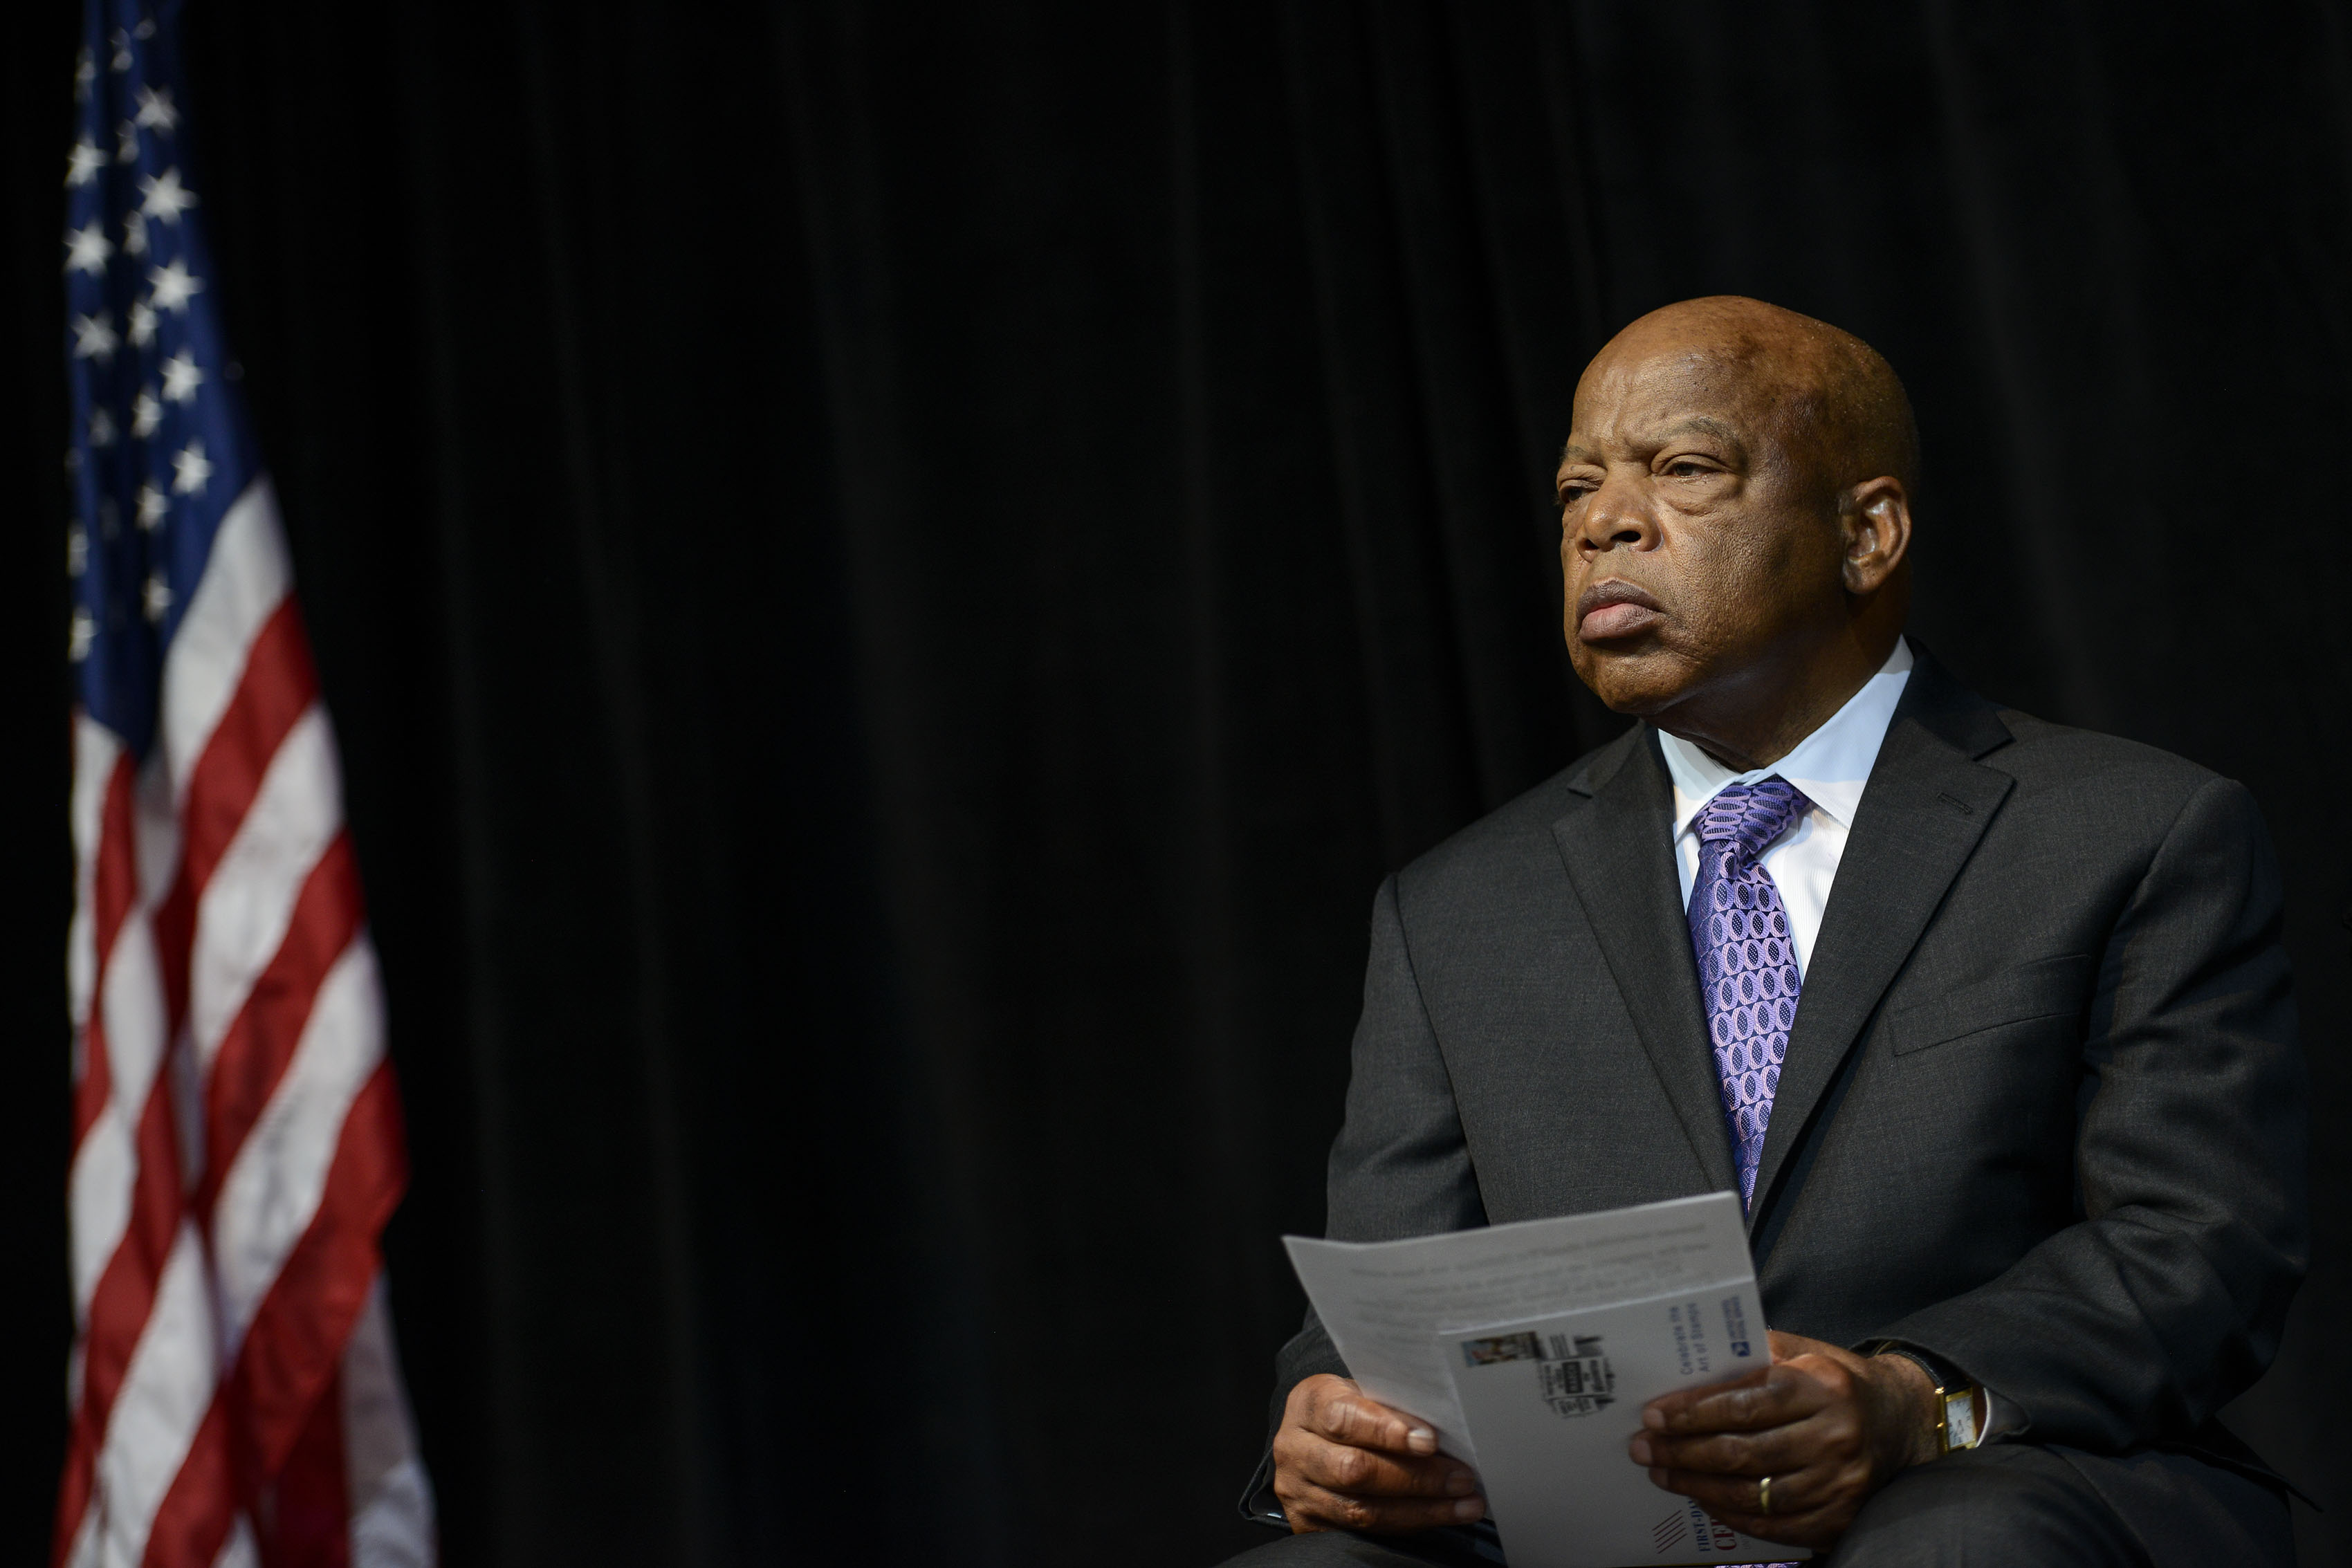 Reps. John Lewis and Bennie Thompson to Boycott Trump’s Civil Rights Museum Appearance